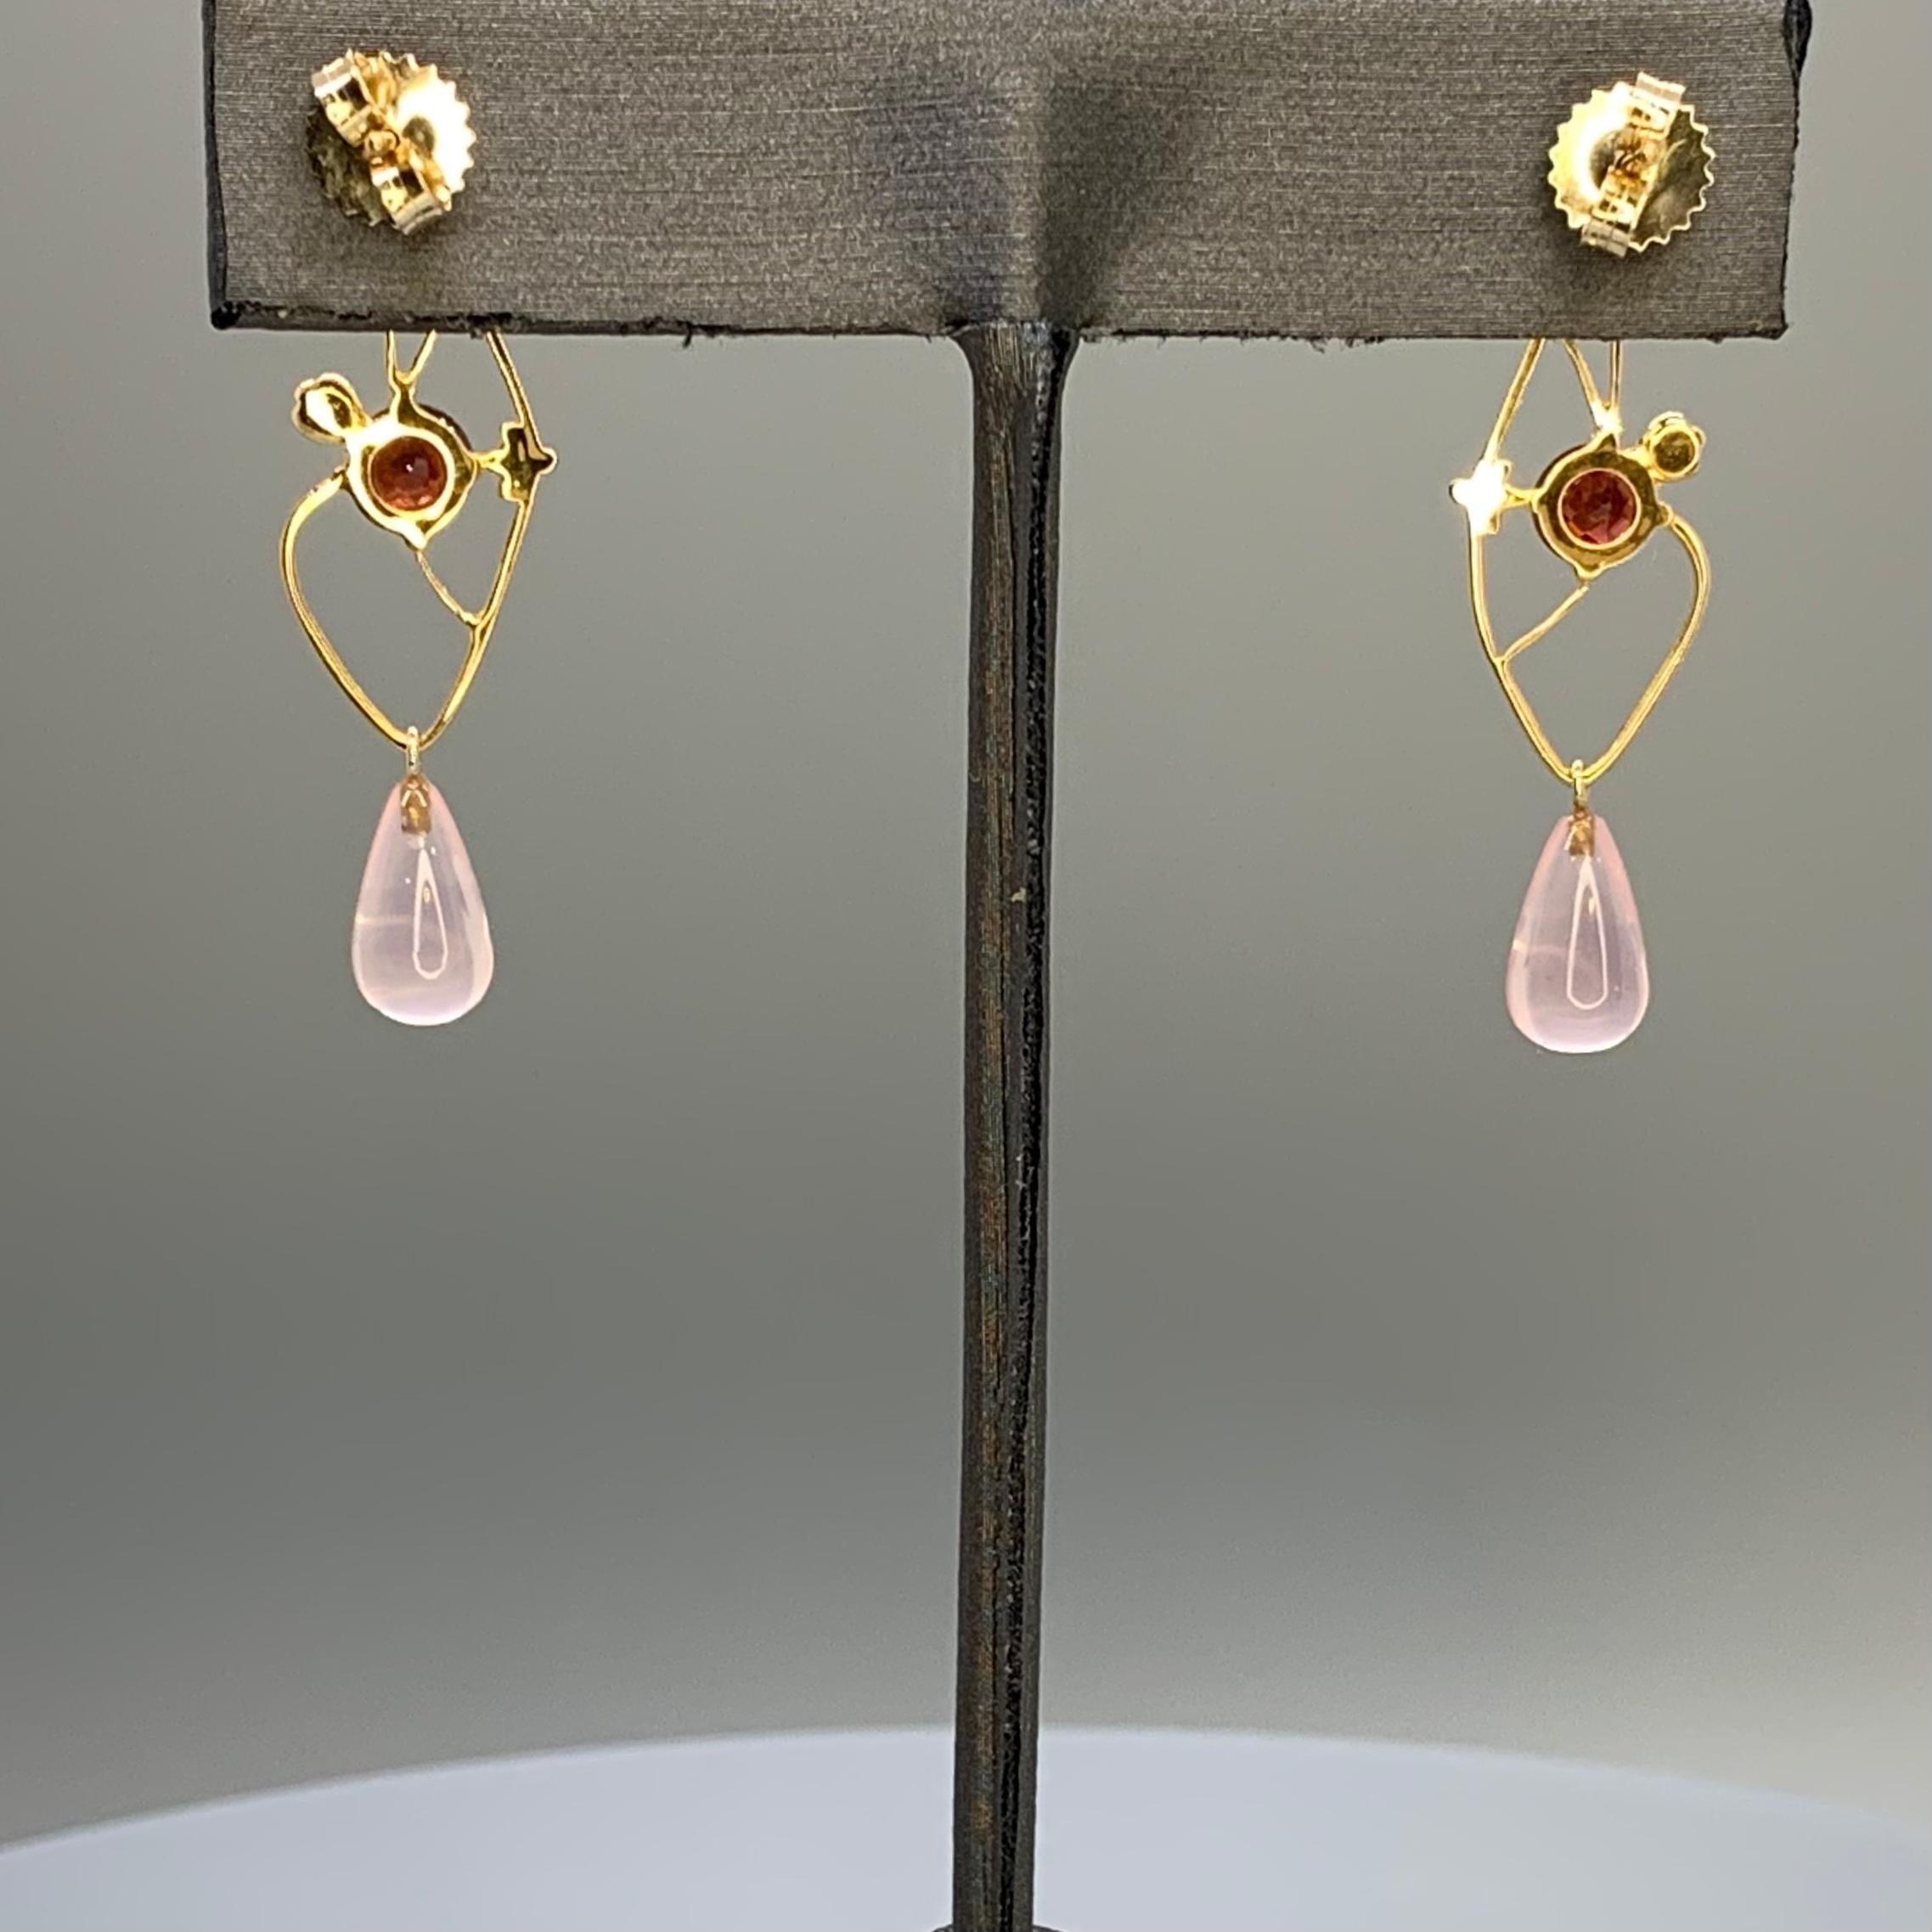 Upcycled Vintage Earrings With Garnet, Rose Quartz, 10k & 14k Gold by G&G Studio In New Condition For Sale In Seattle, WA